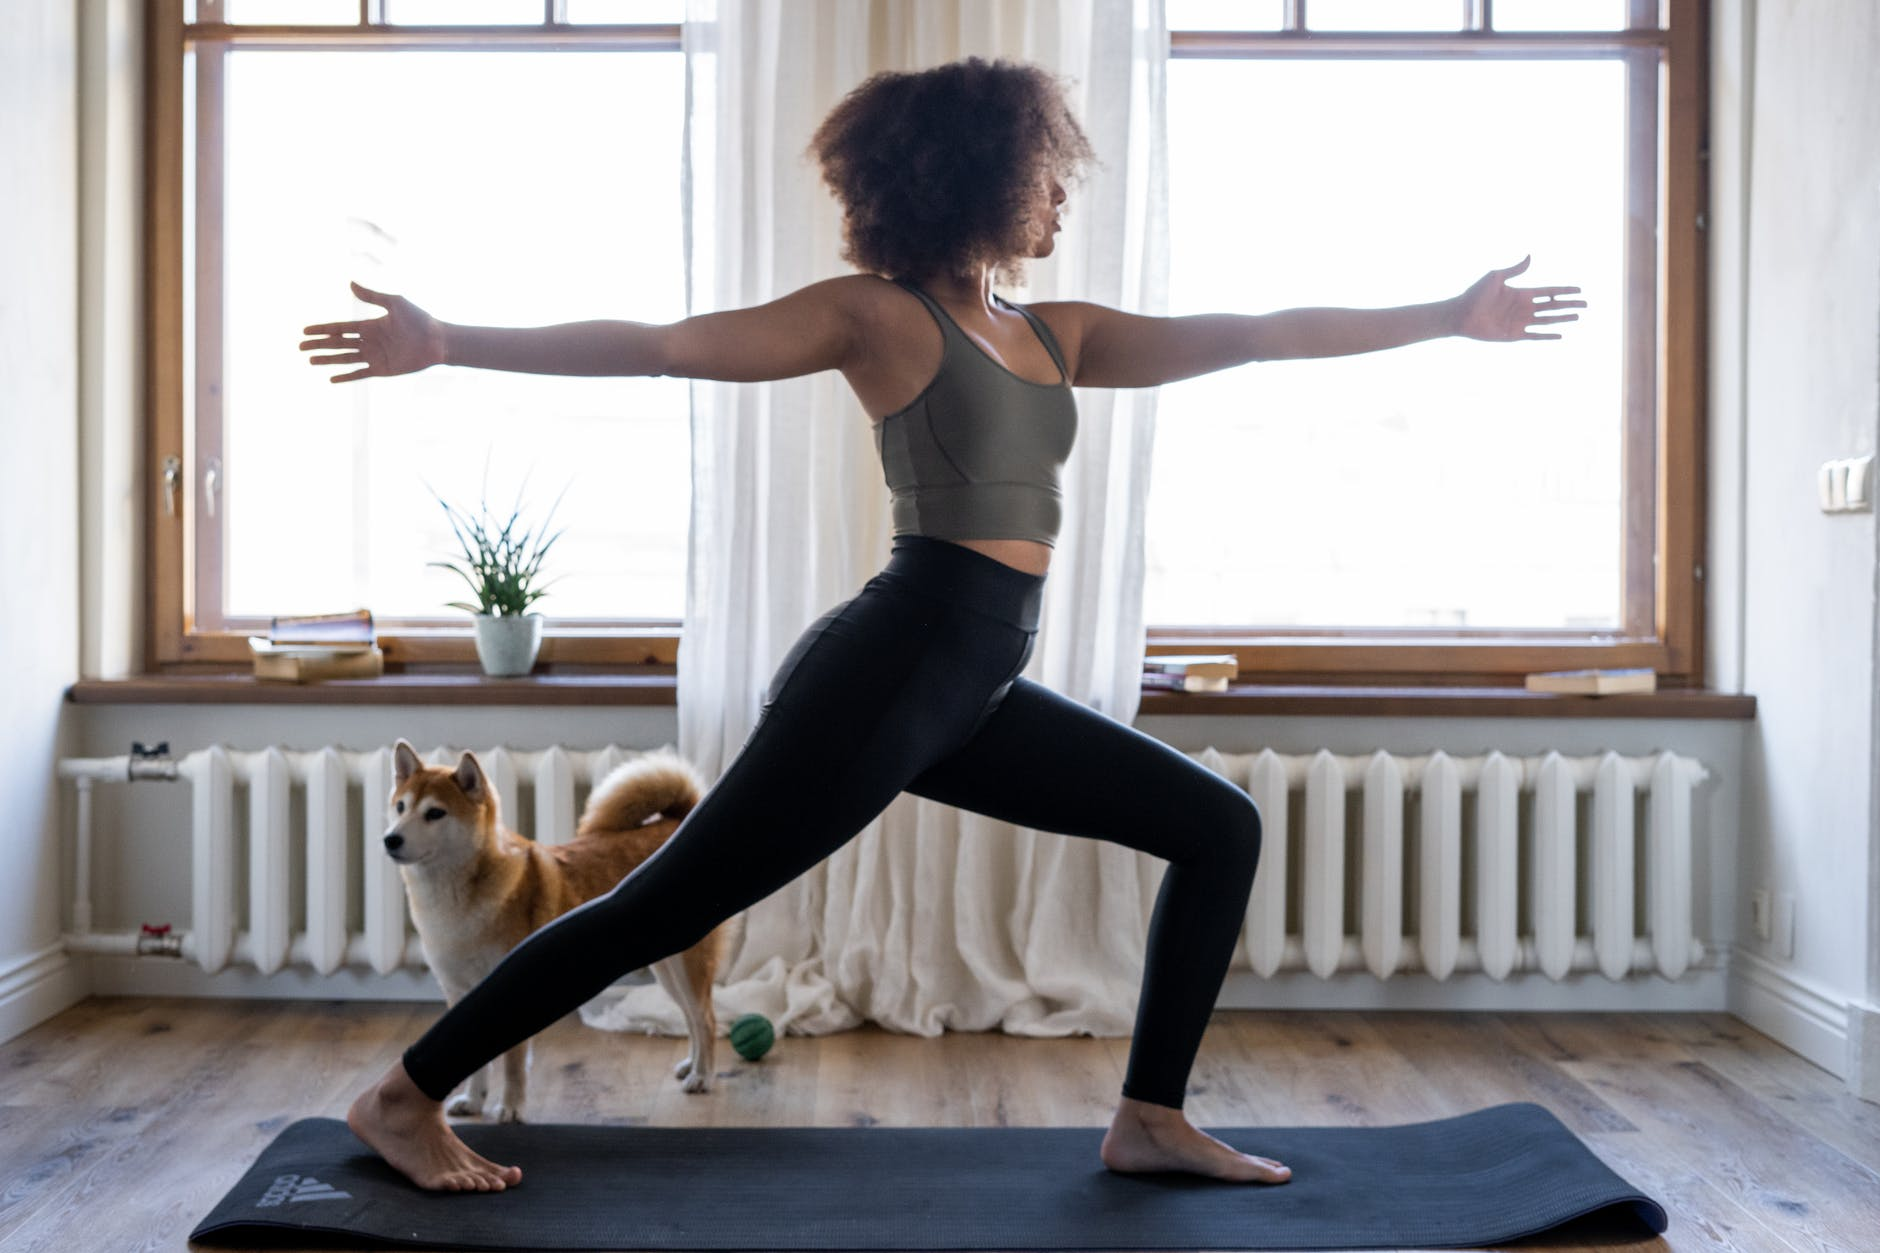 afroamerican woman practicing yoga at home with her dog